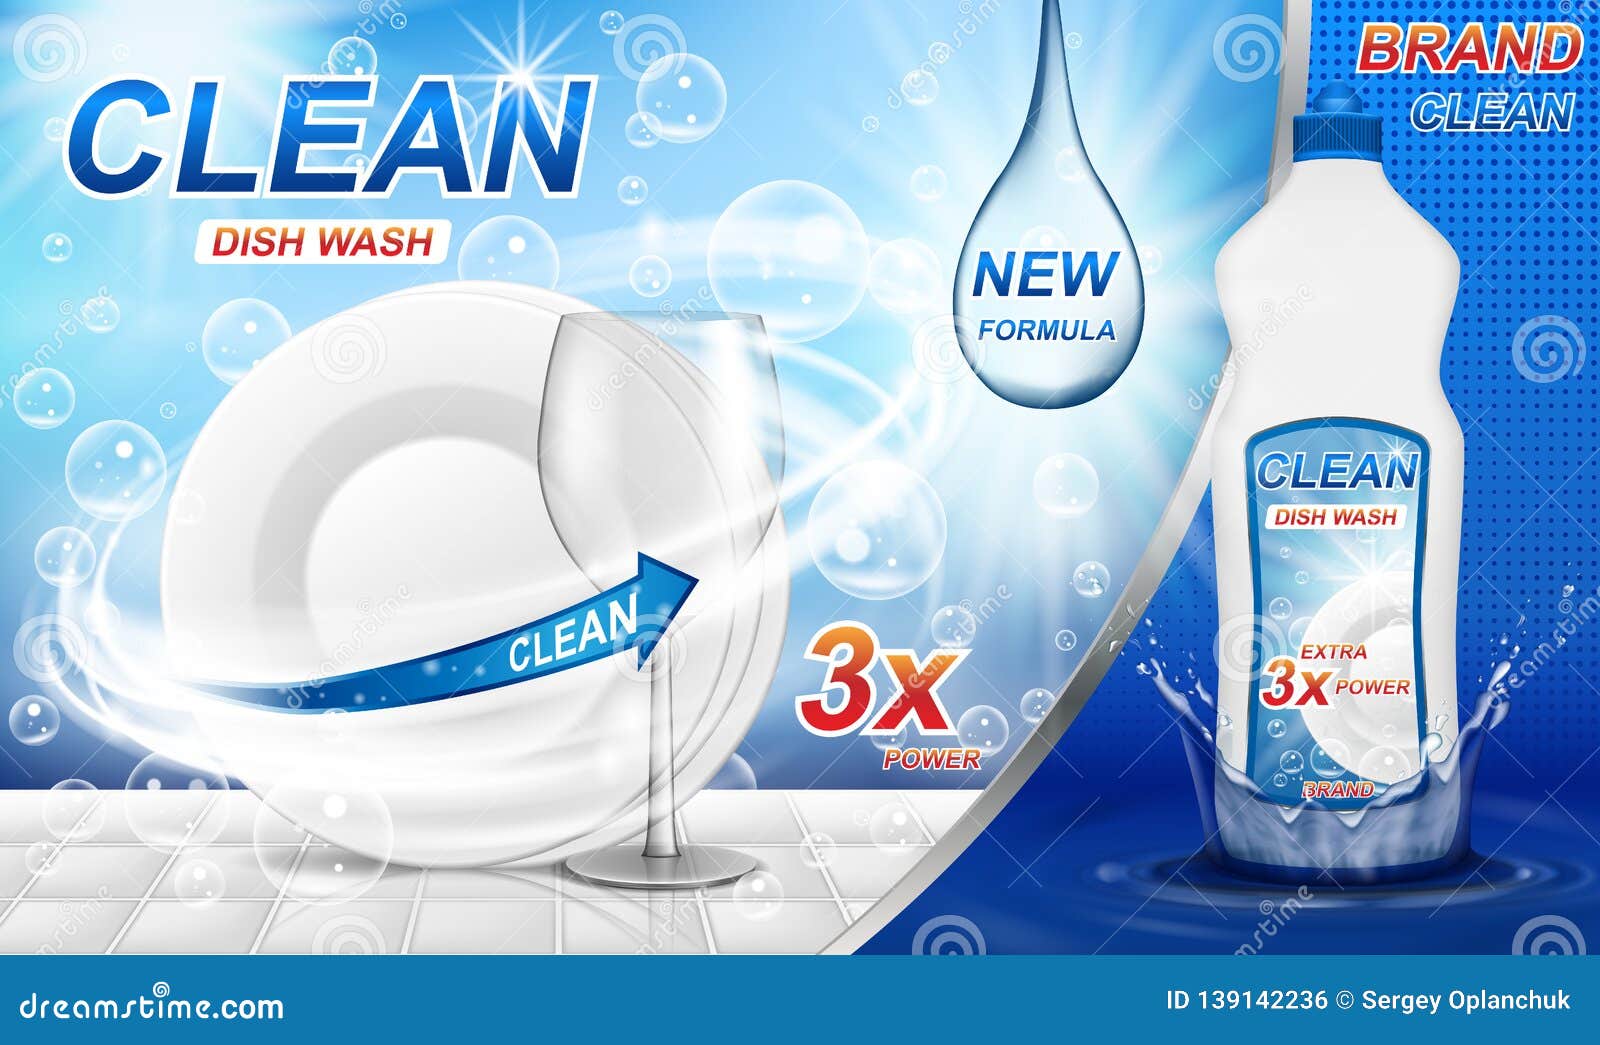 dish wash soap ads. realistic plastic dishwashing packaging with label . liquid wash soap with clean dishes and